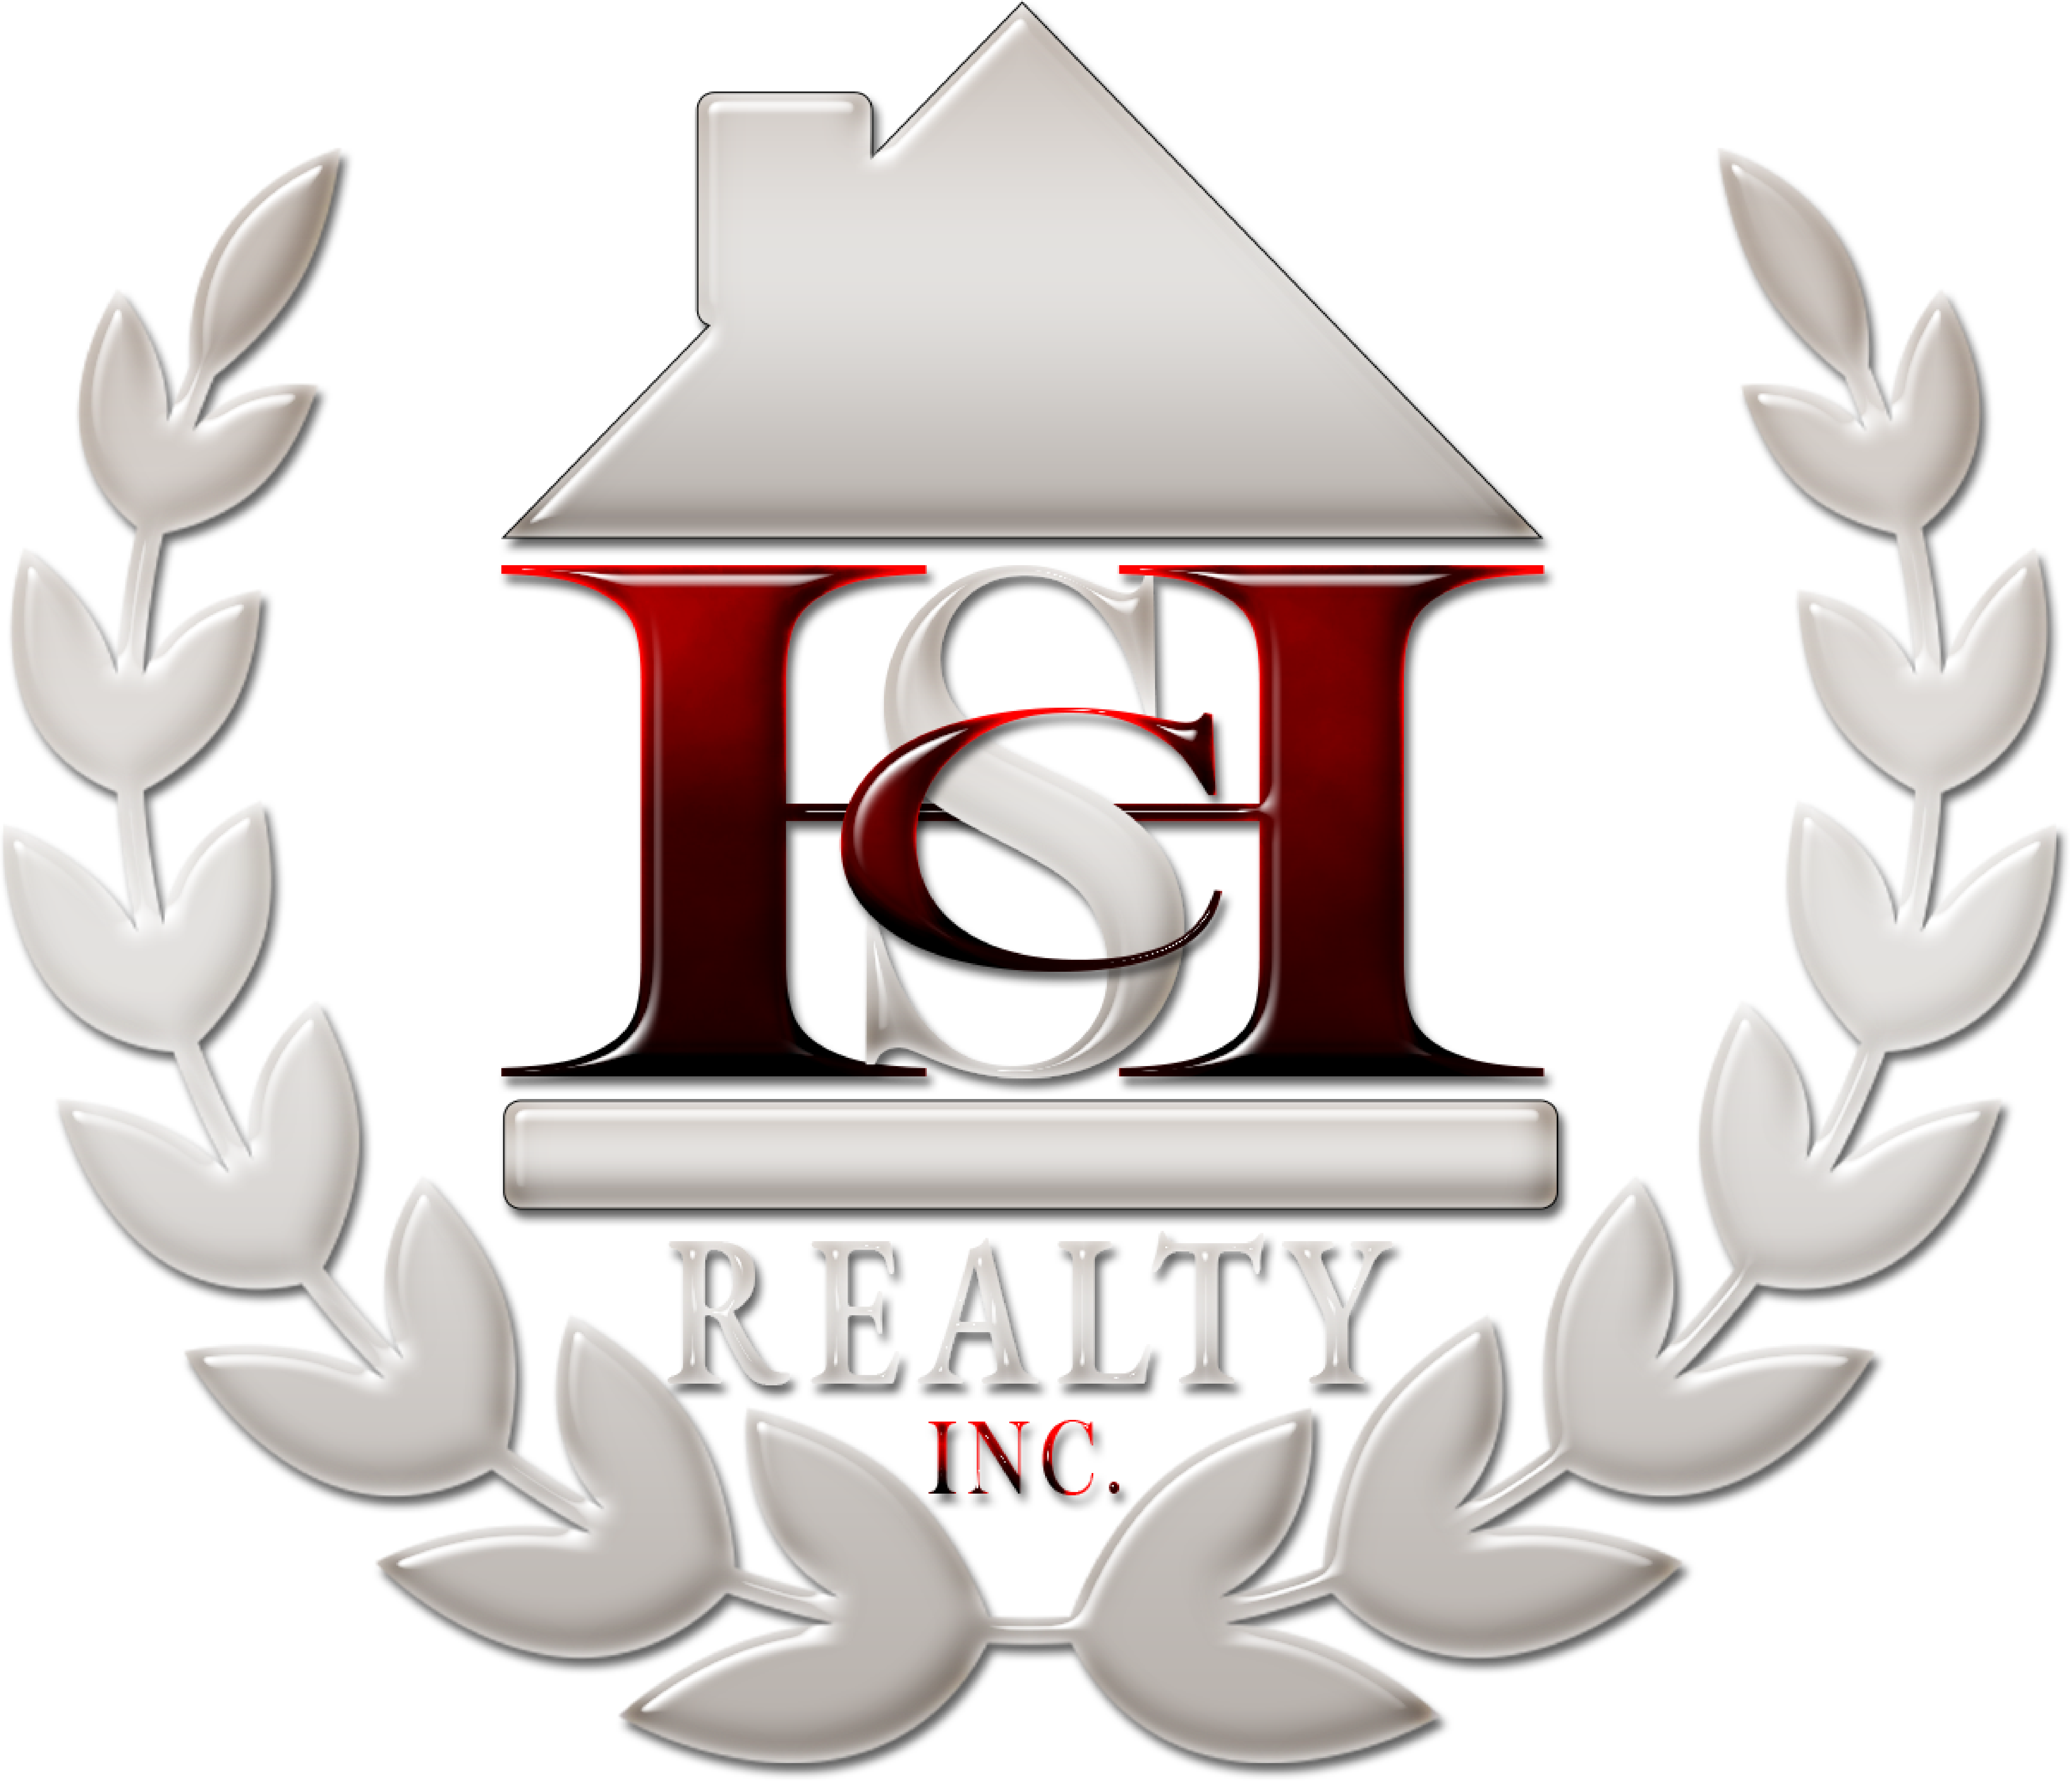 HSC Realty INC.